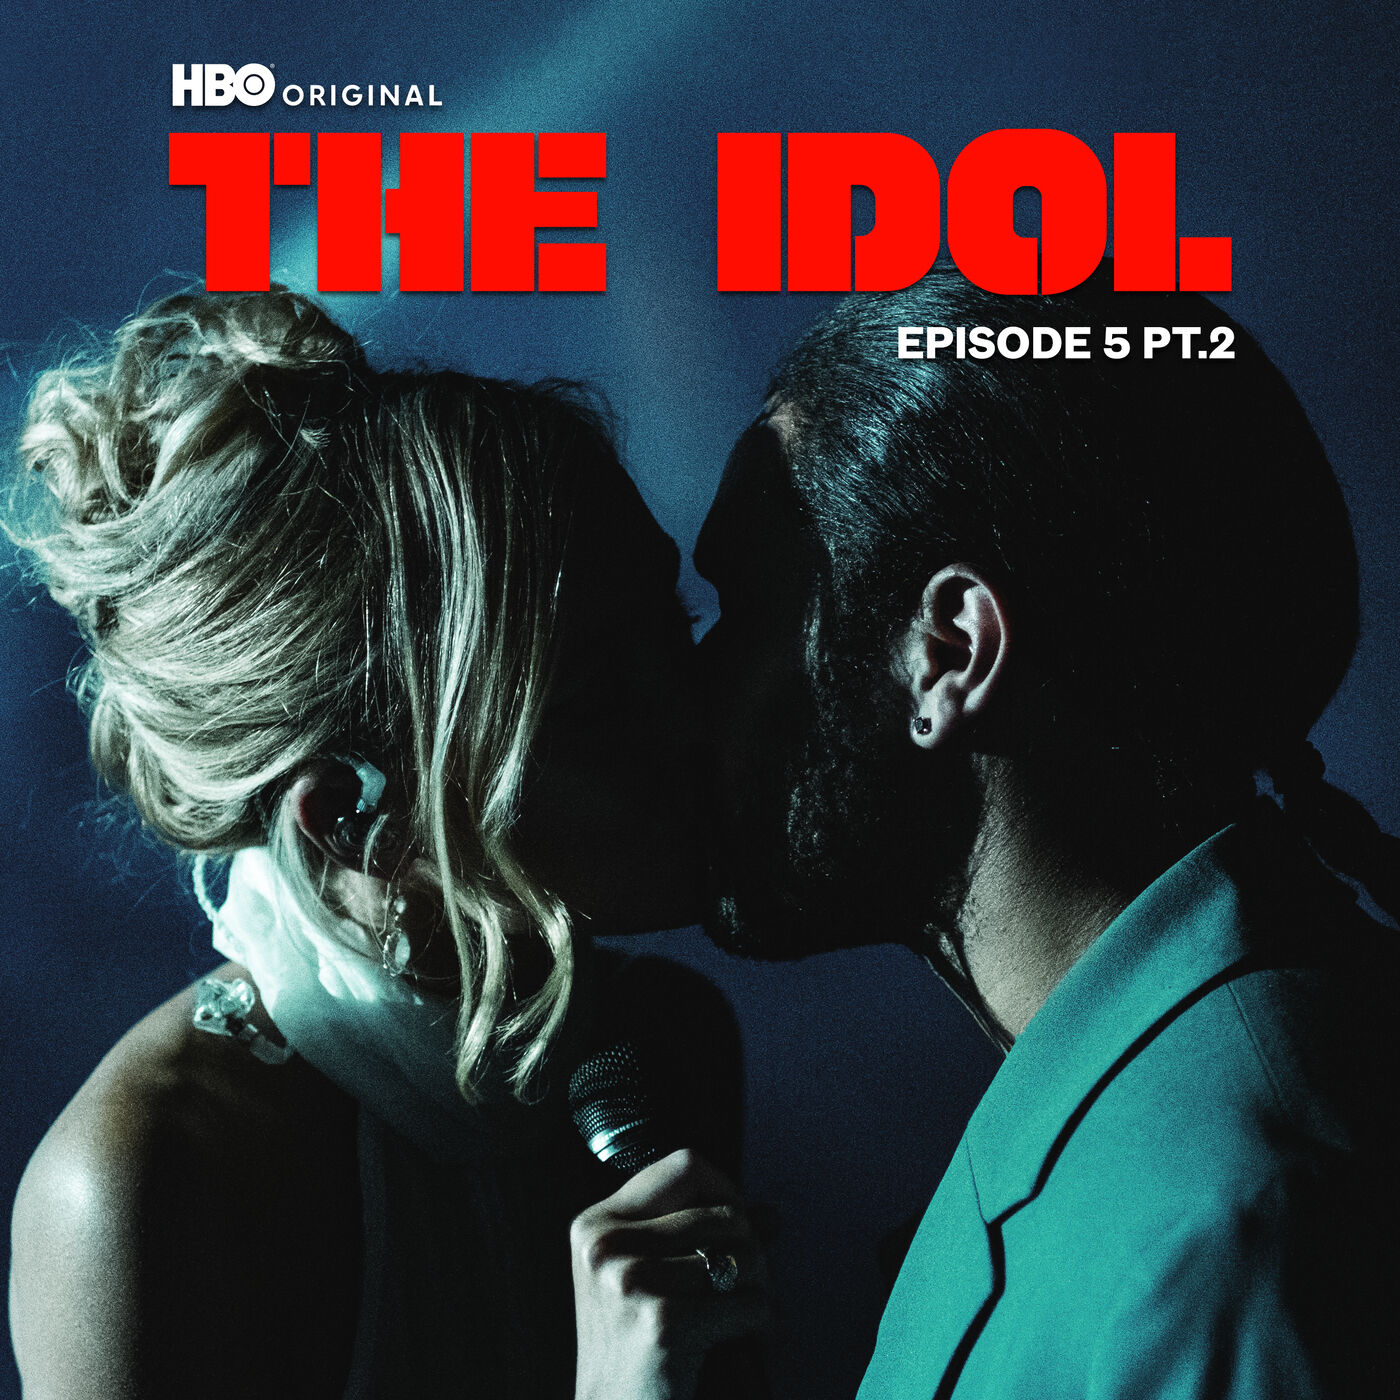 The Weeknd – The Idol Episode 5 Part 2 (Music from the HBO Original Series)【88.2kHz／24bit】美国区-OppsUpro音乐帝国